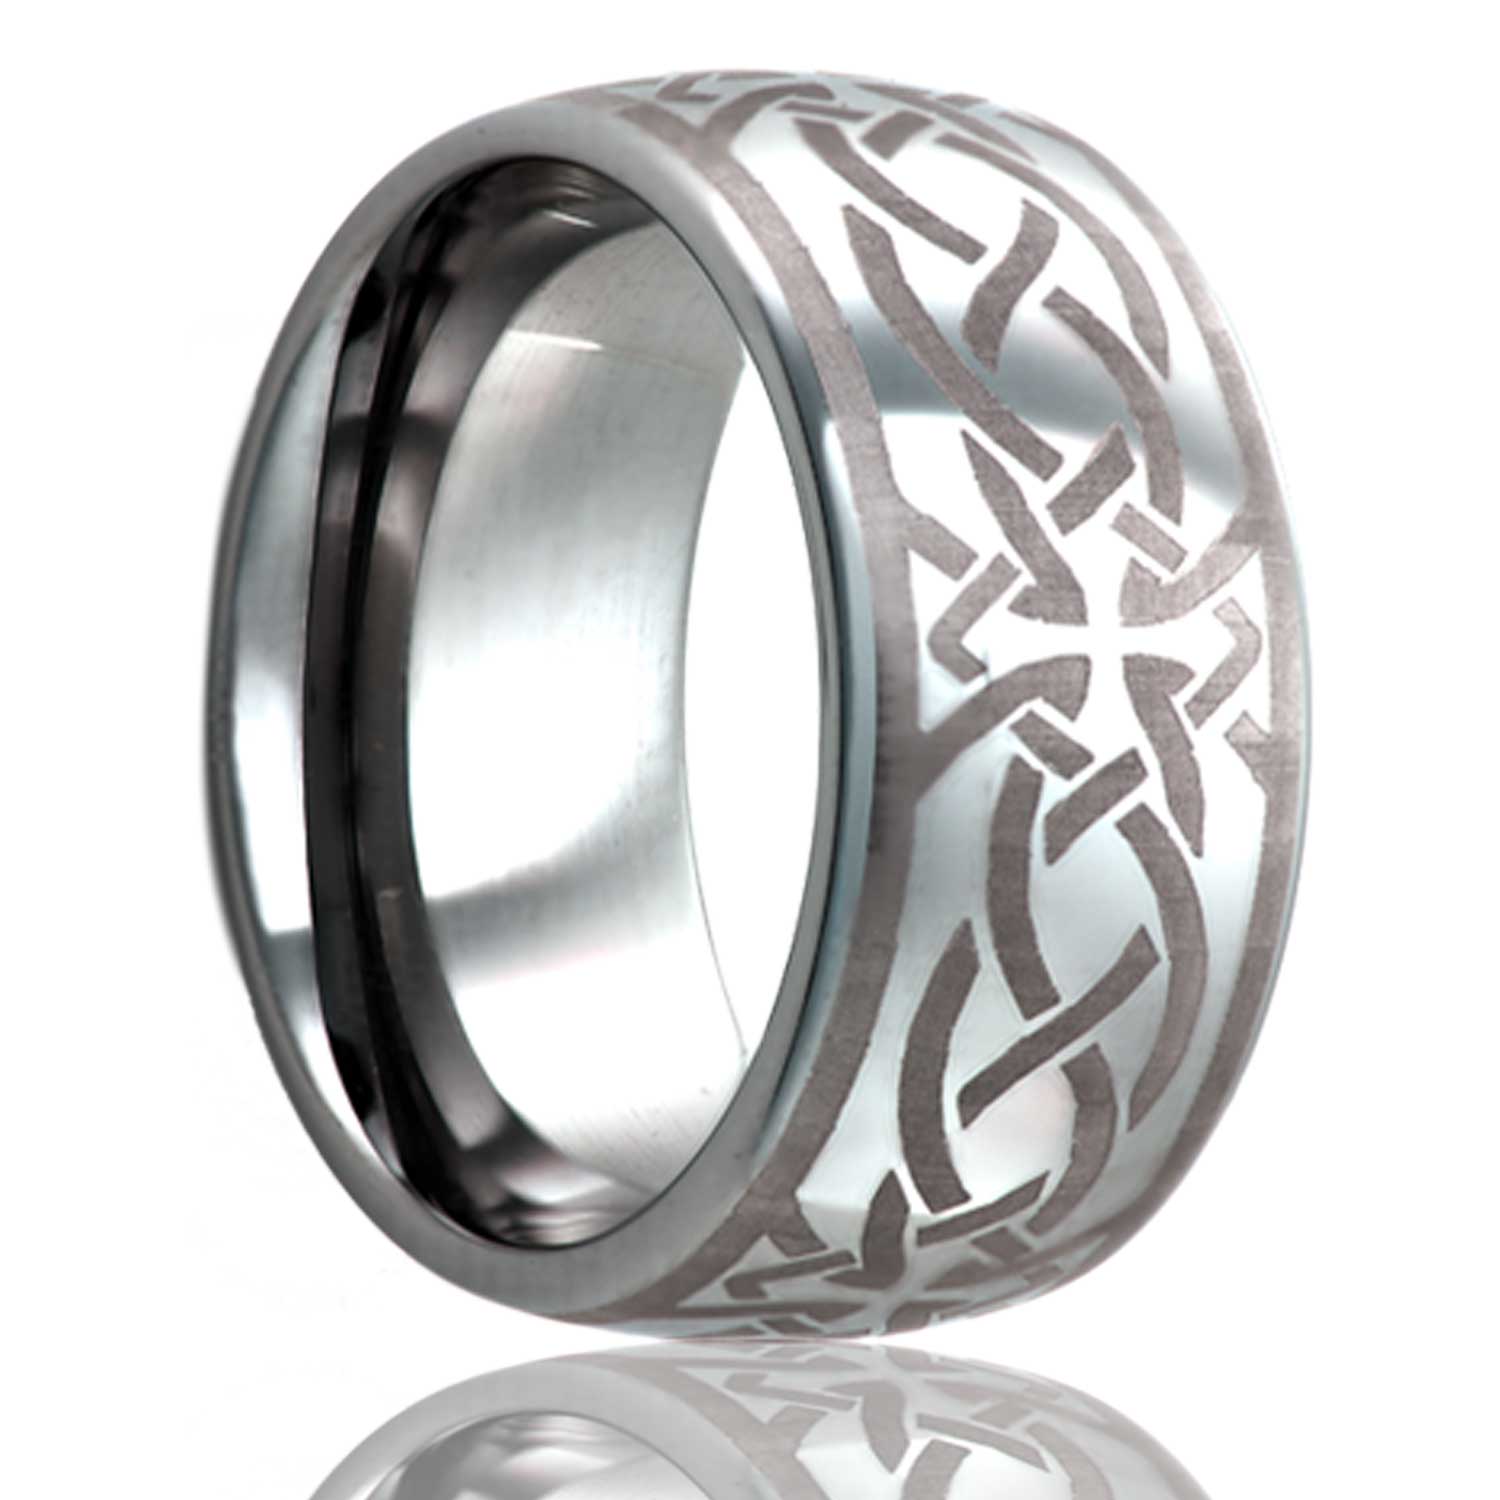 A celtic cross knot domed titanium wedding band displayed on a neutral white background.